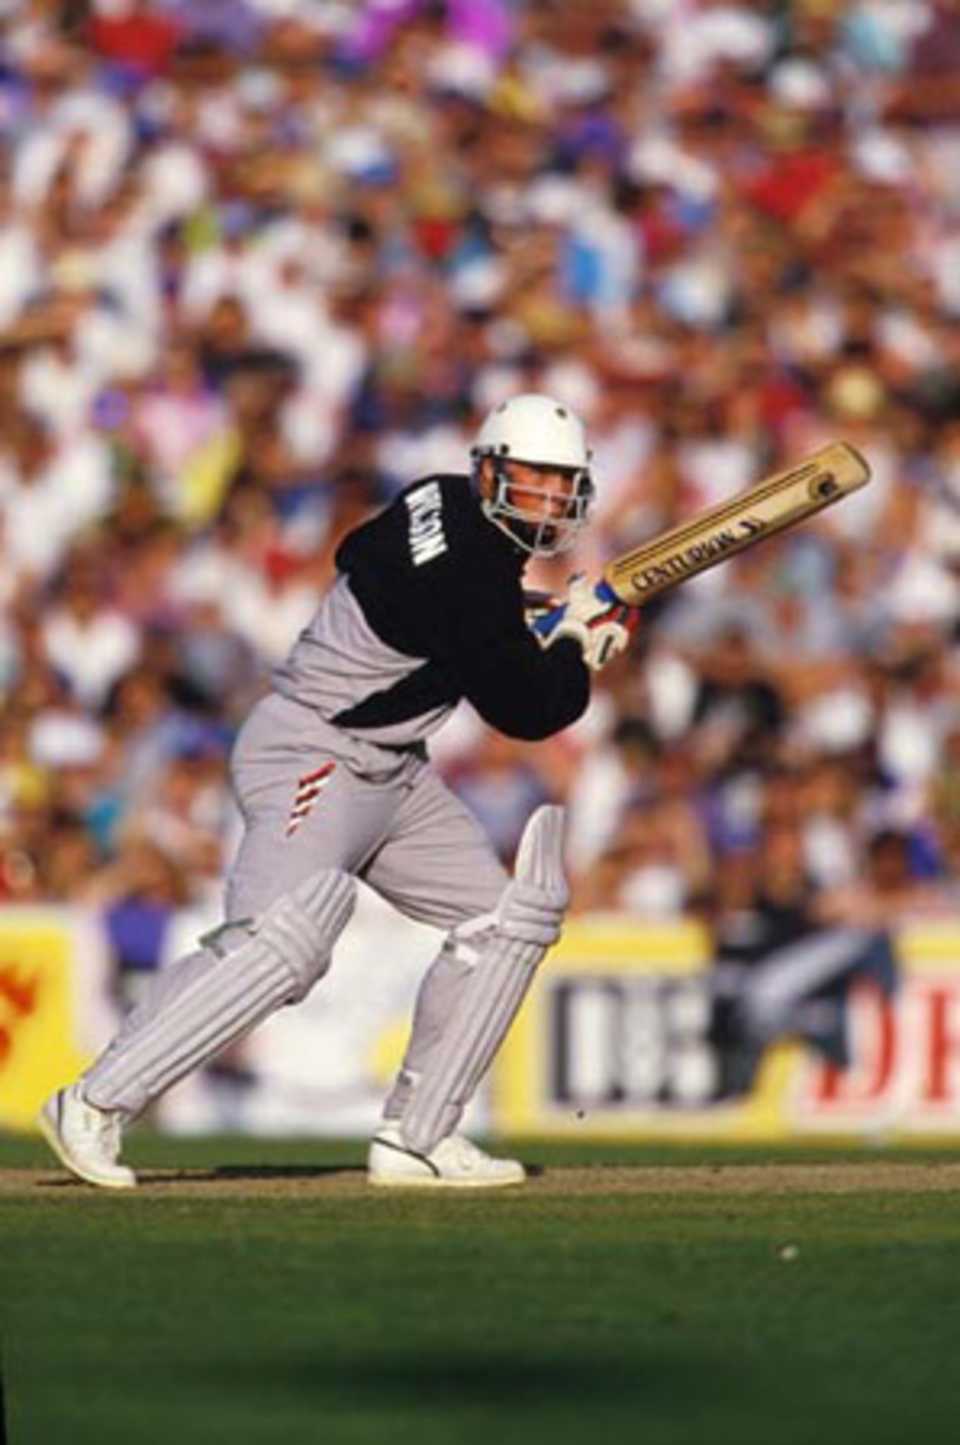 New Zealand batsman Jeff Wilson eases a delivery into the off side. 5th ODI: New Zealand v Australia at Eden Park, Auckland, 28 March 1993.